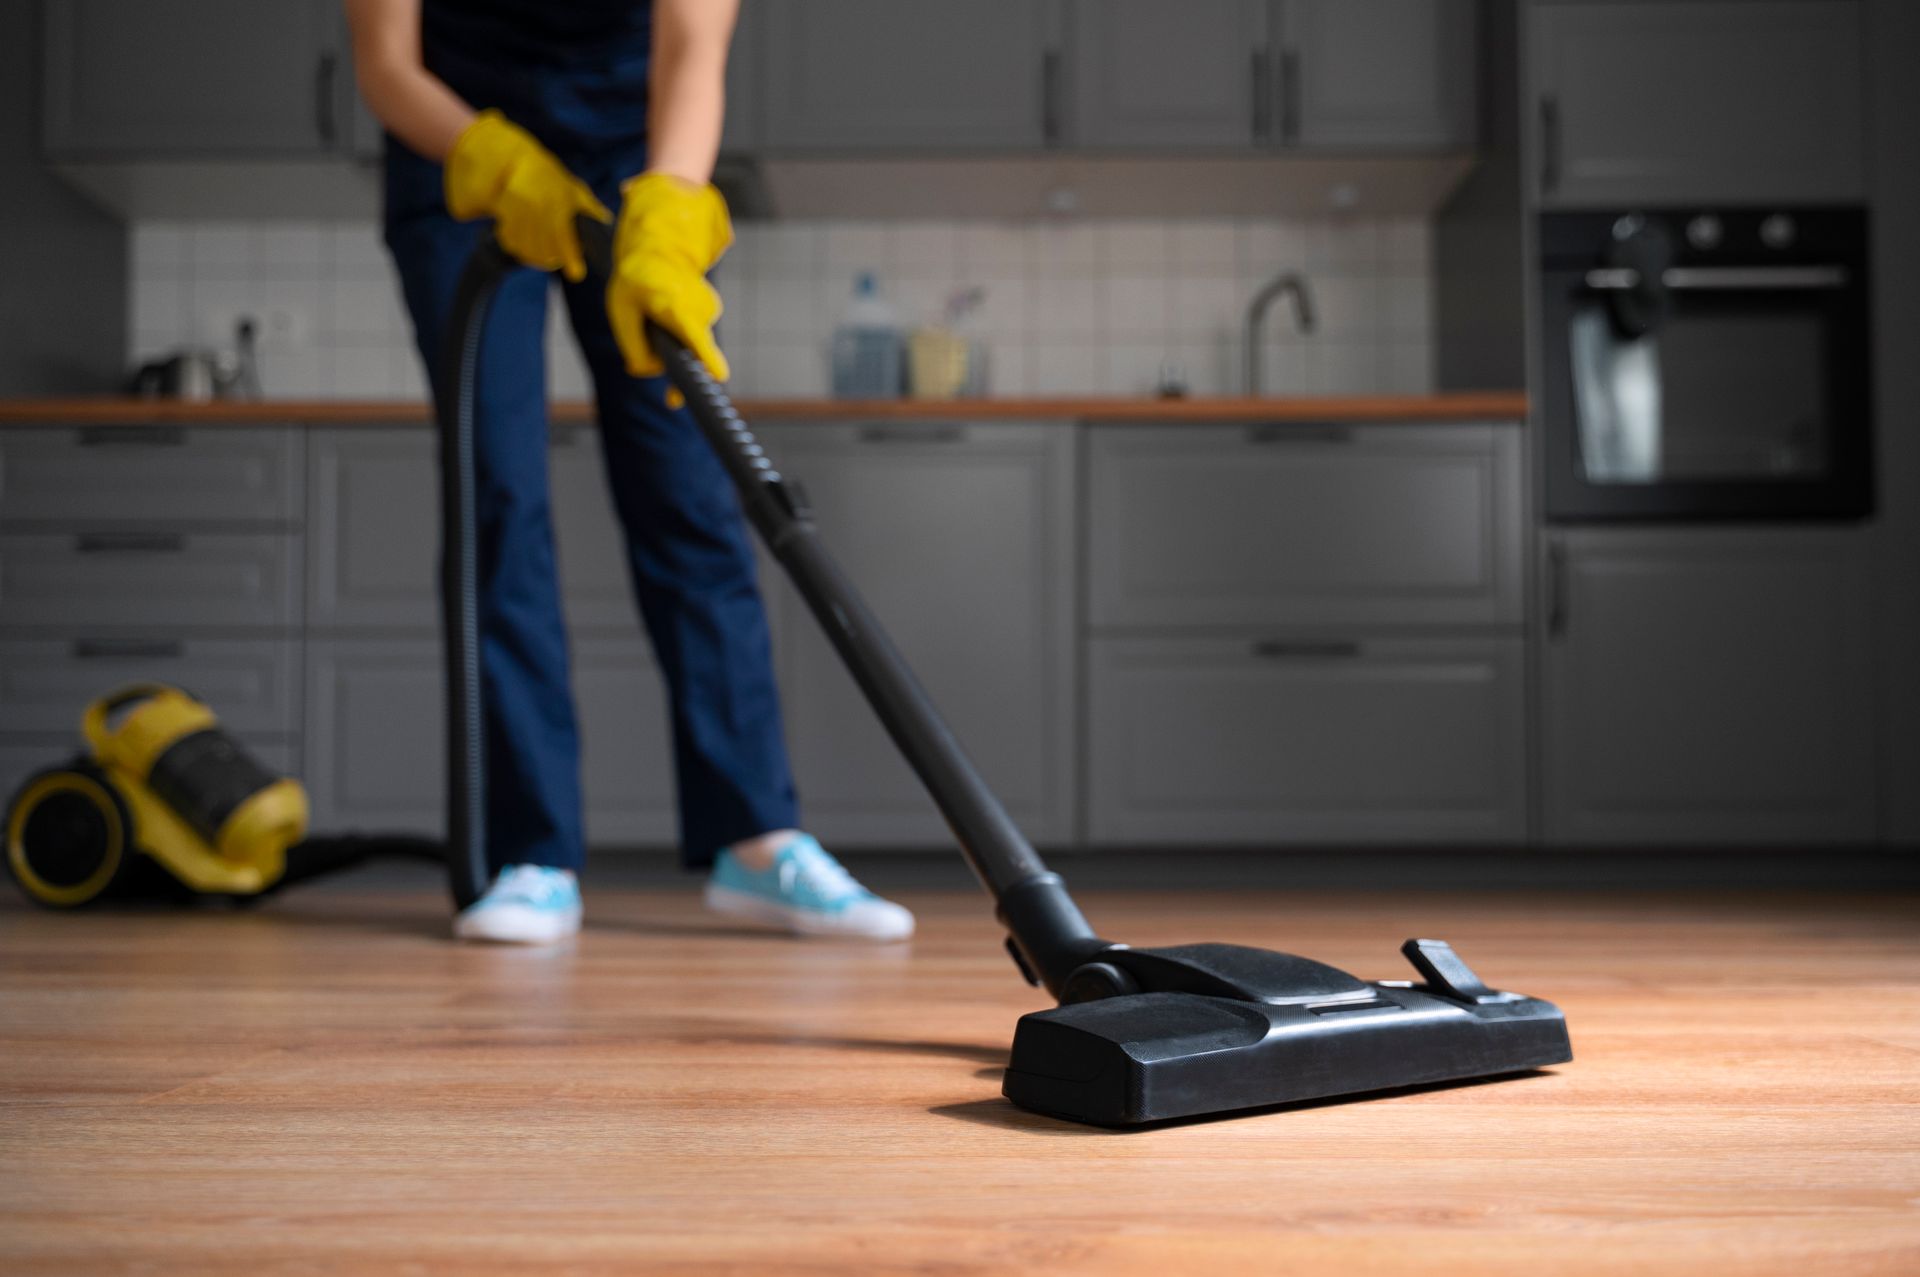 a woman is using a vacuum cleaner to clean the floor in a kitchen .